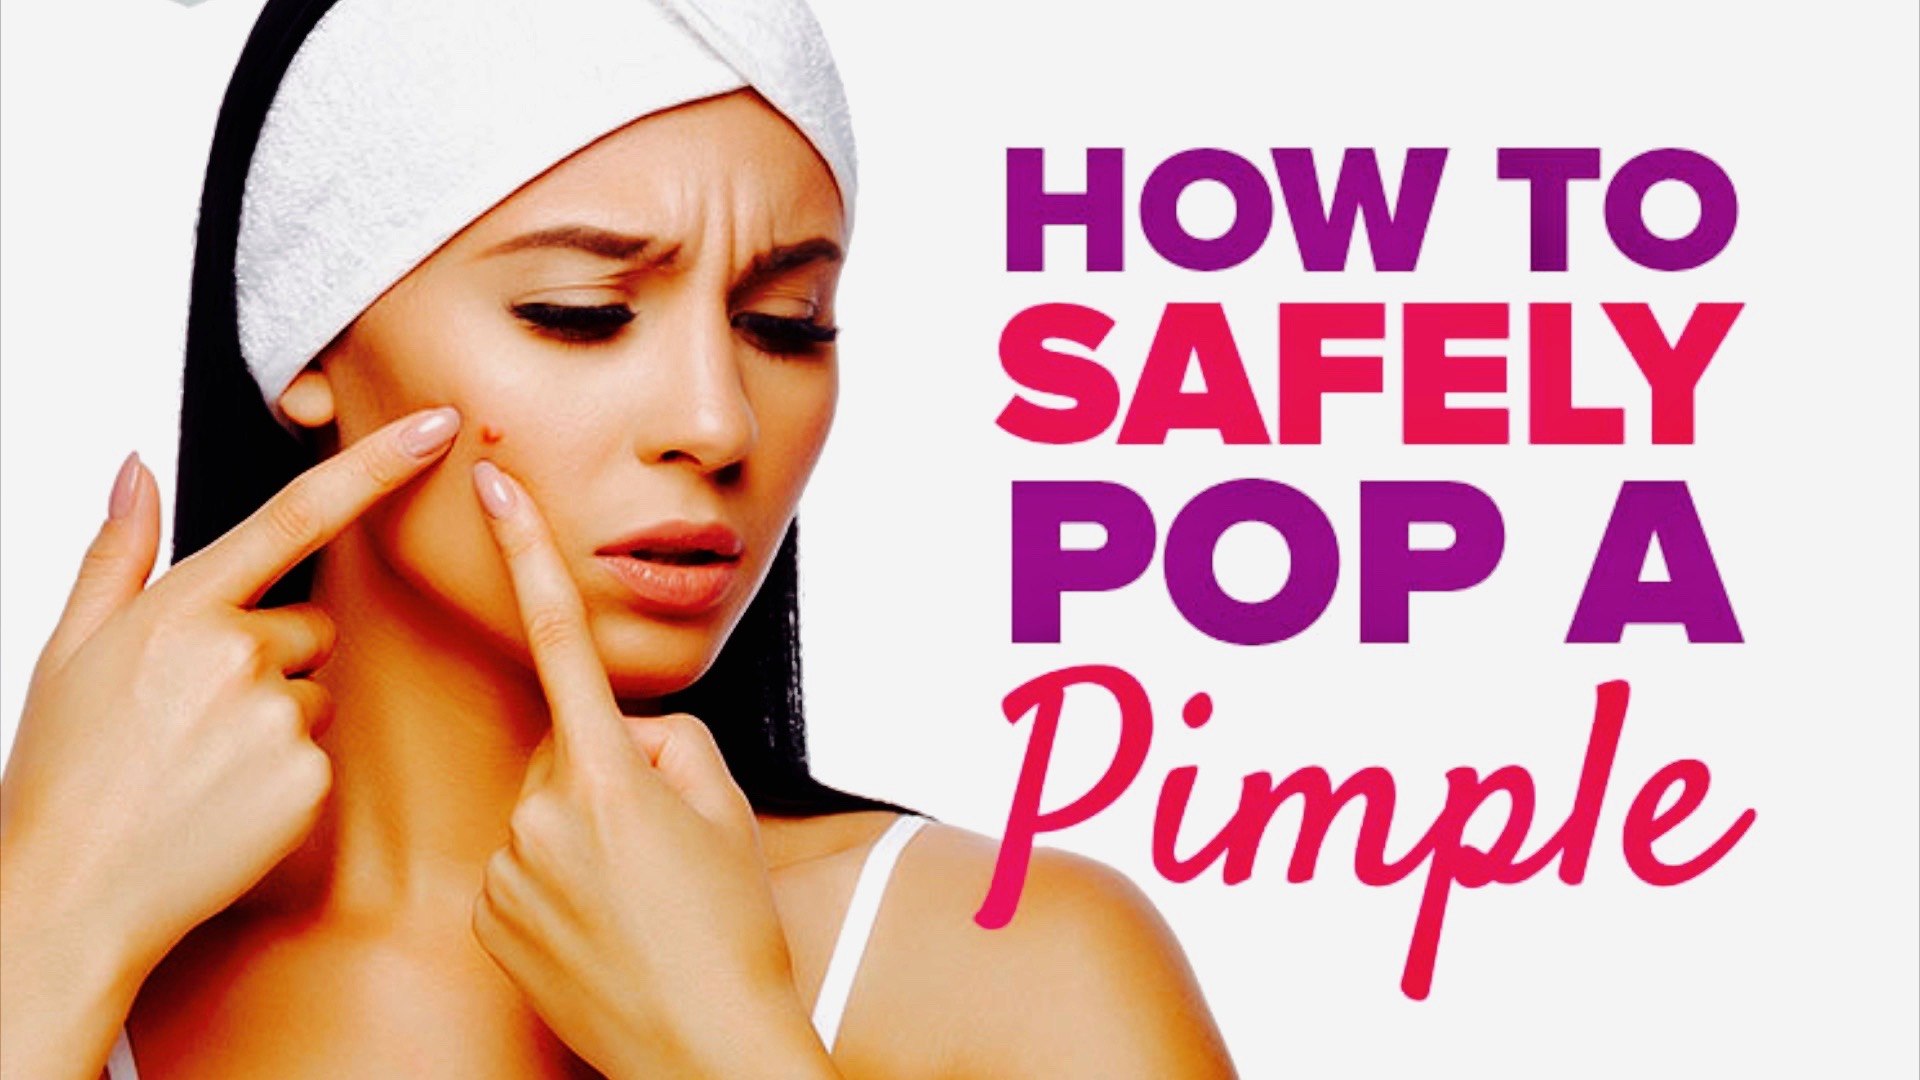 How to Pop a Pimple Safely, According to Experts